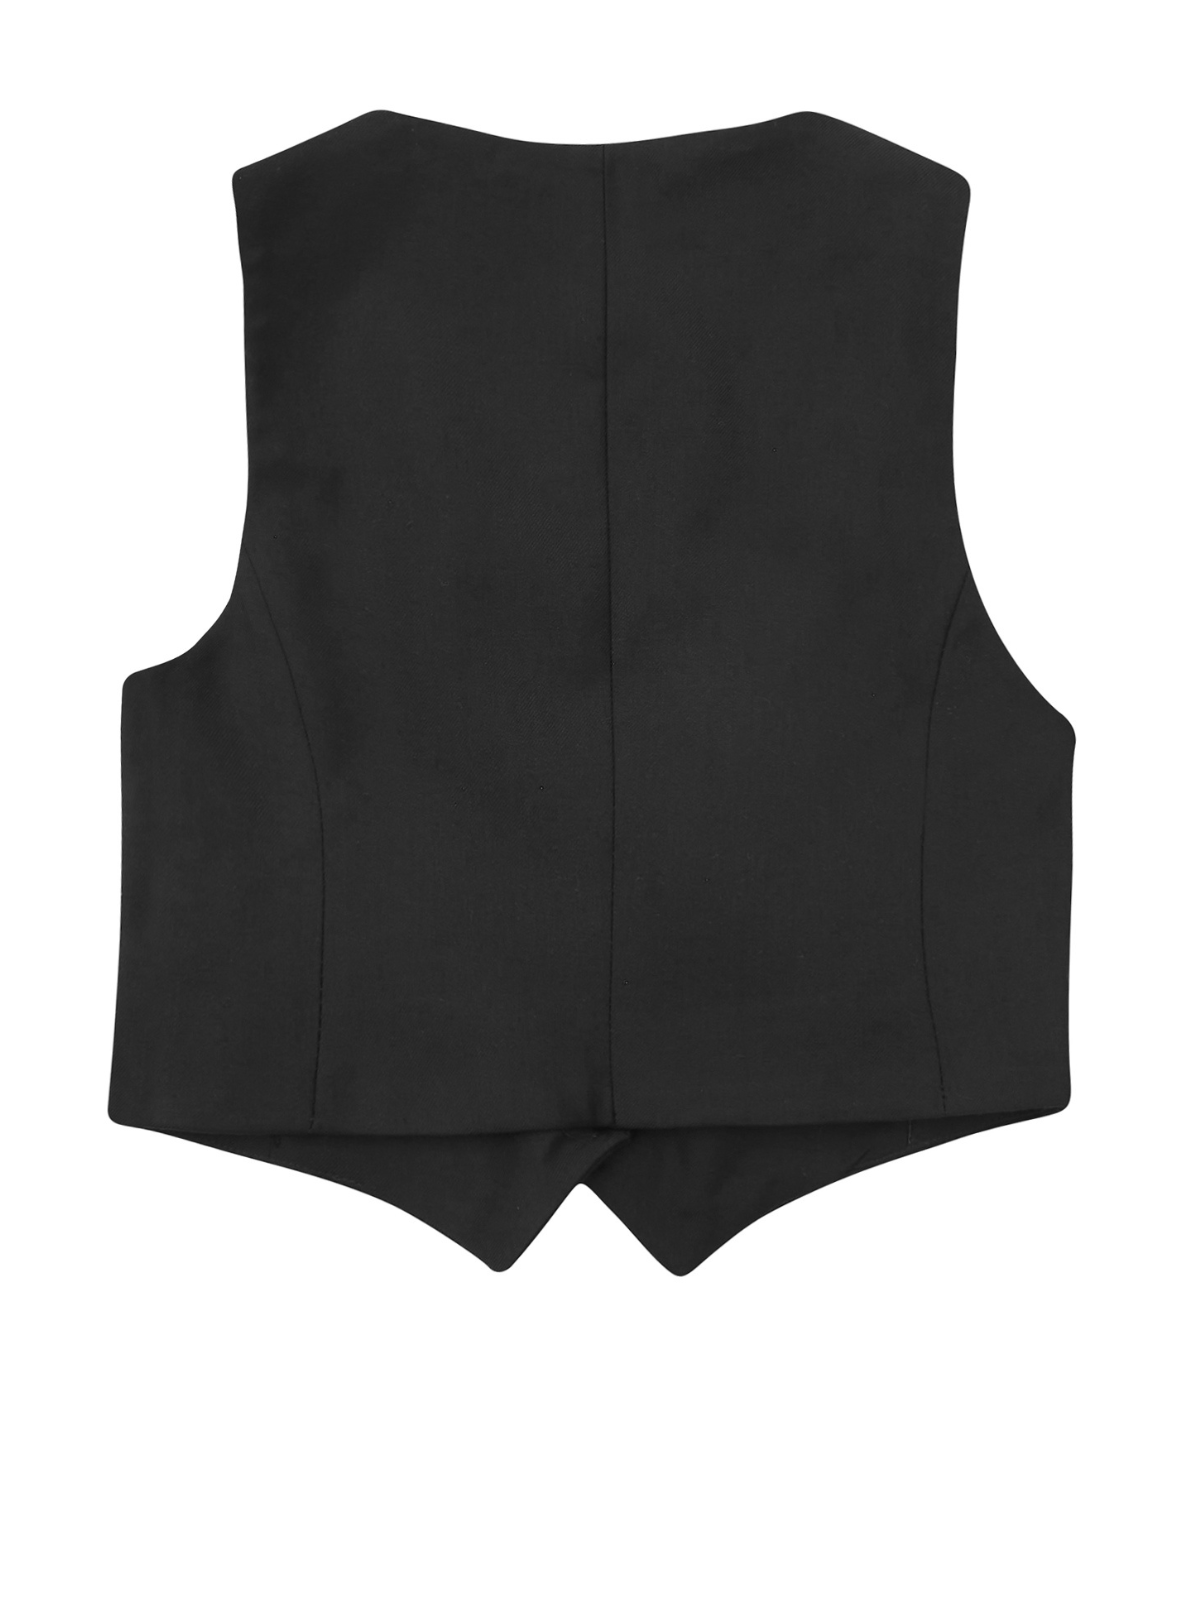 Classic Black Girls Bow Pin Vest by Kids Couture